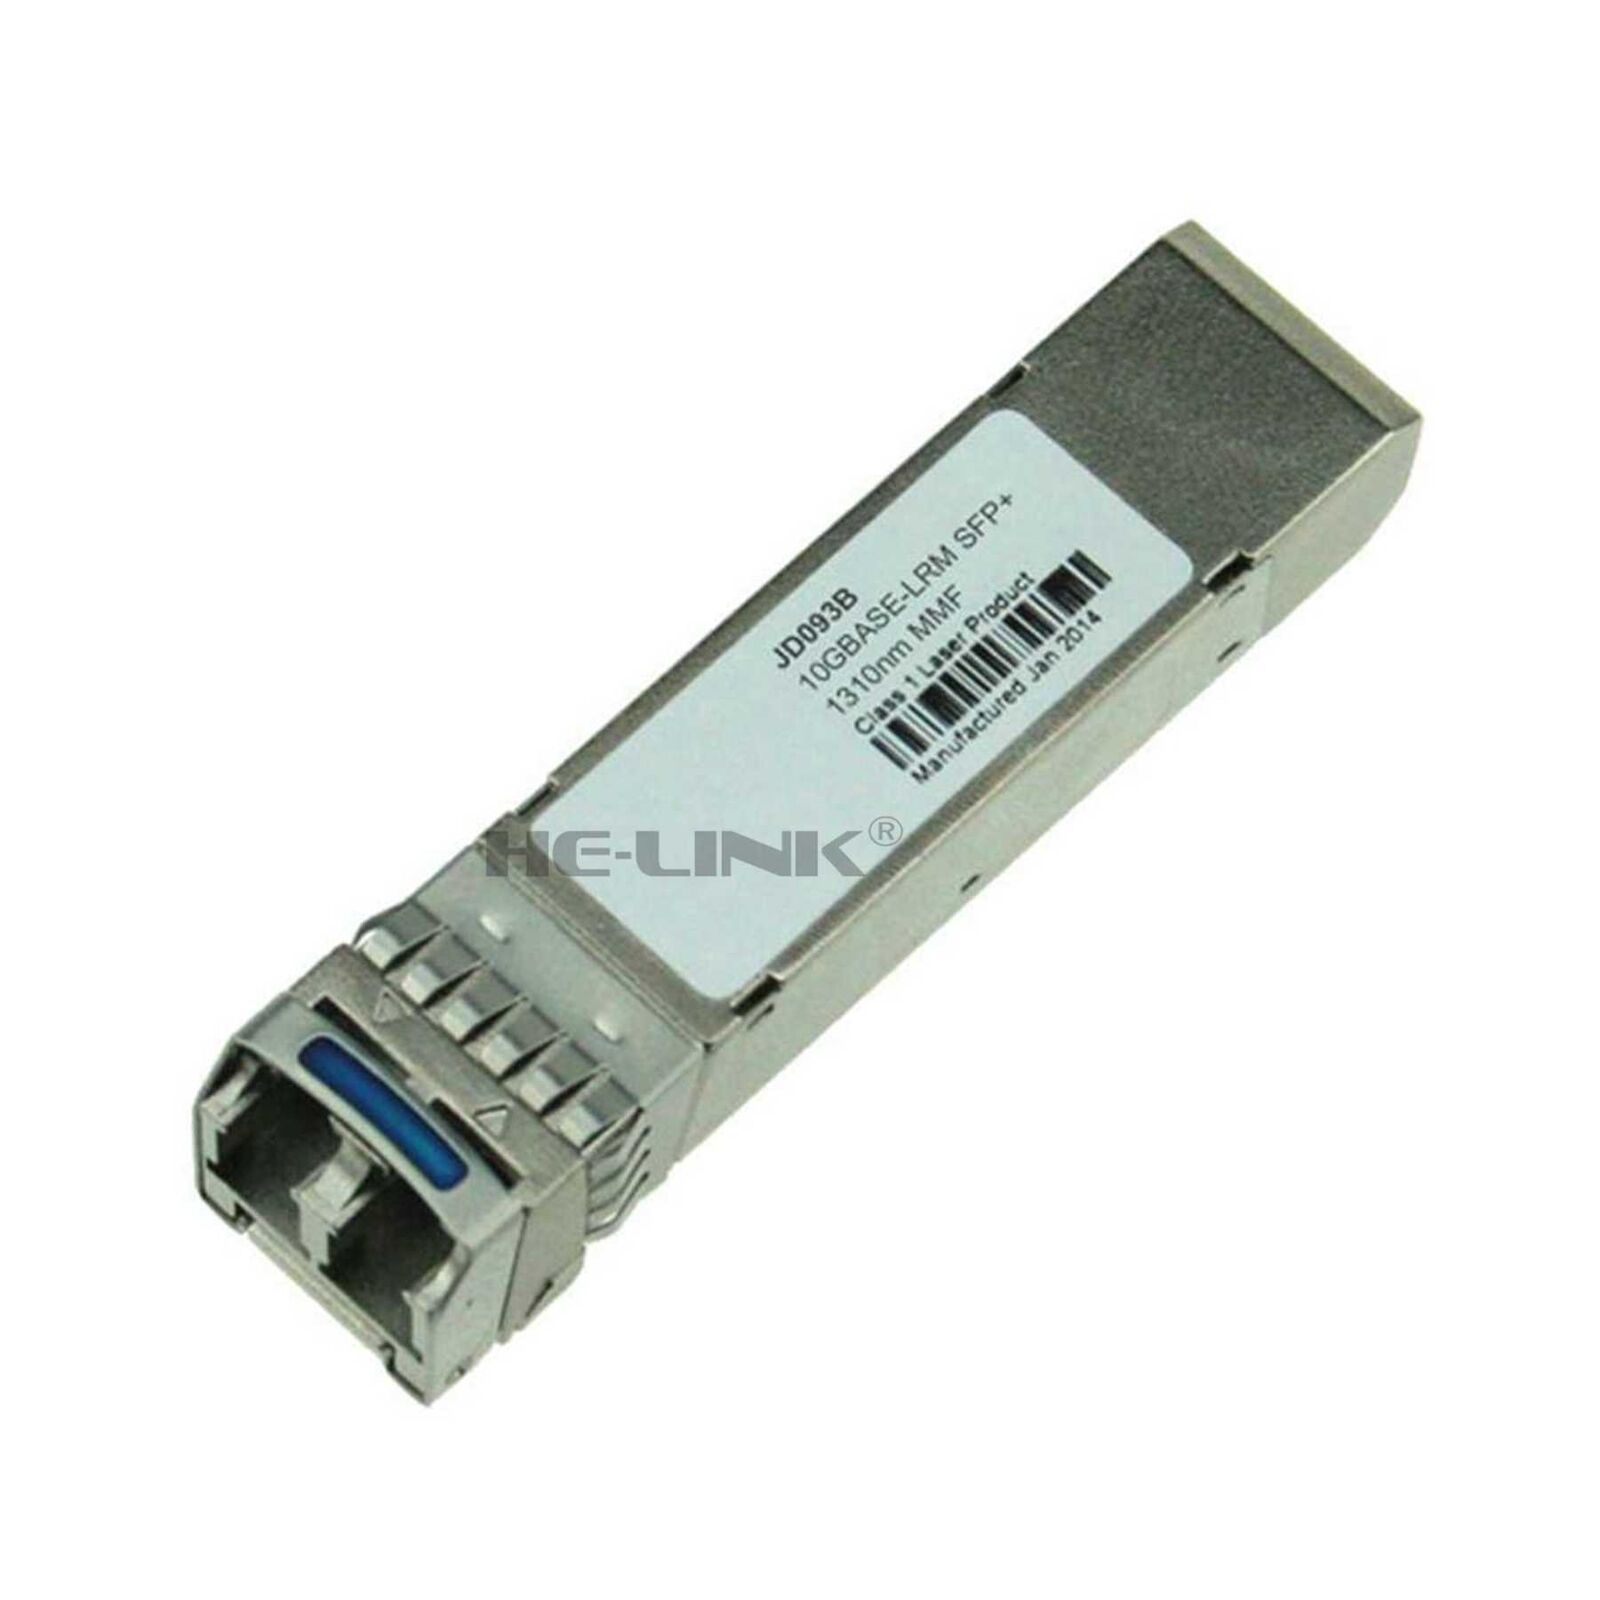 JD093B HPE Compatible 10GBASE LRM SFP+ 1310nm 220m Transceiver